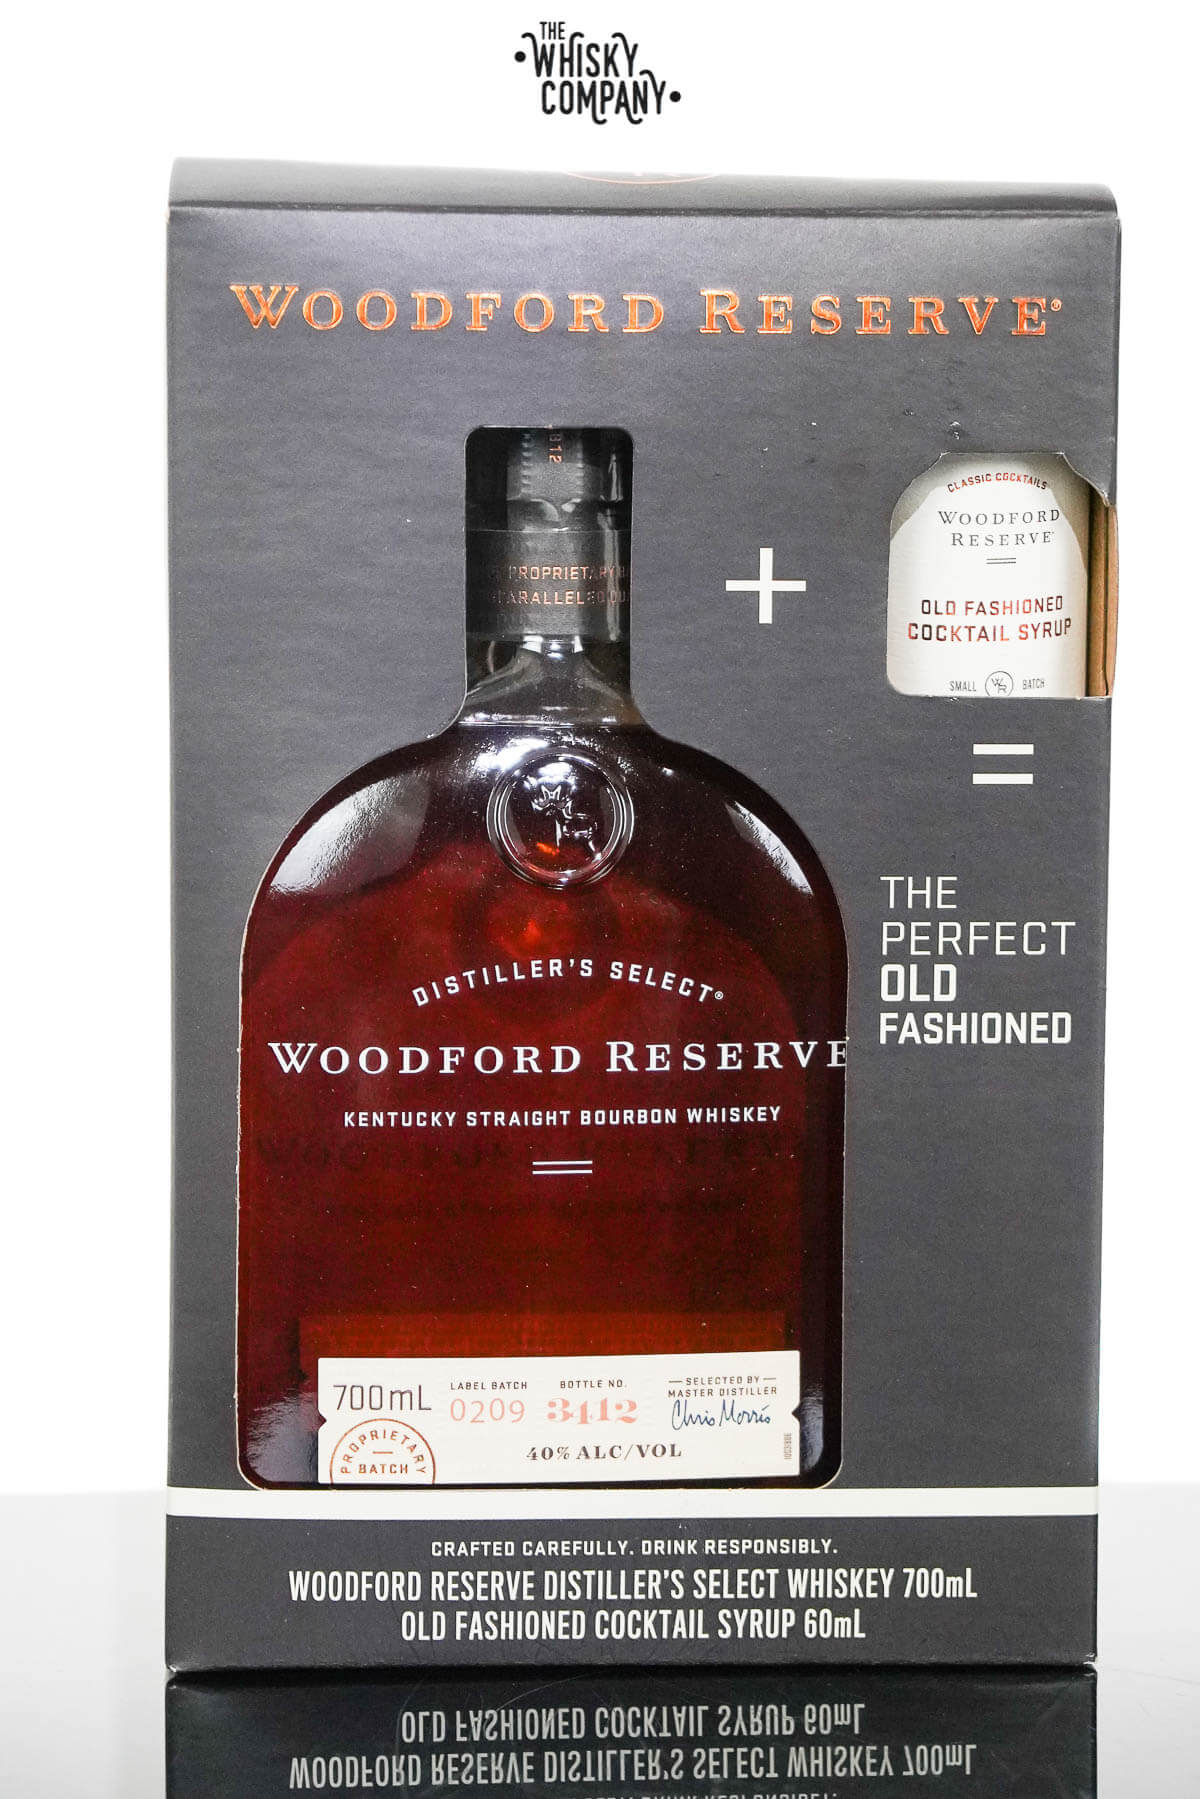 https://www.thewhiskycompany.com.au/wp-content/uploads/2021/05/the_whisky_company_woodford_reserve_distillers_select_plus_the_perfect_old_fashioned_kentucky_straight_bourbon_whiskey.jpg